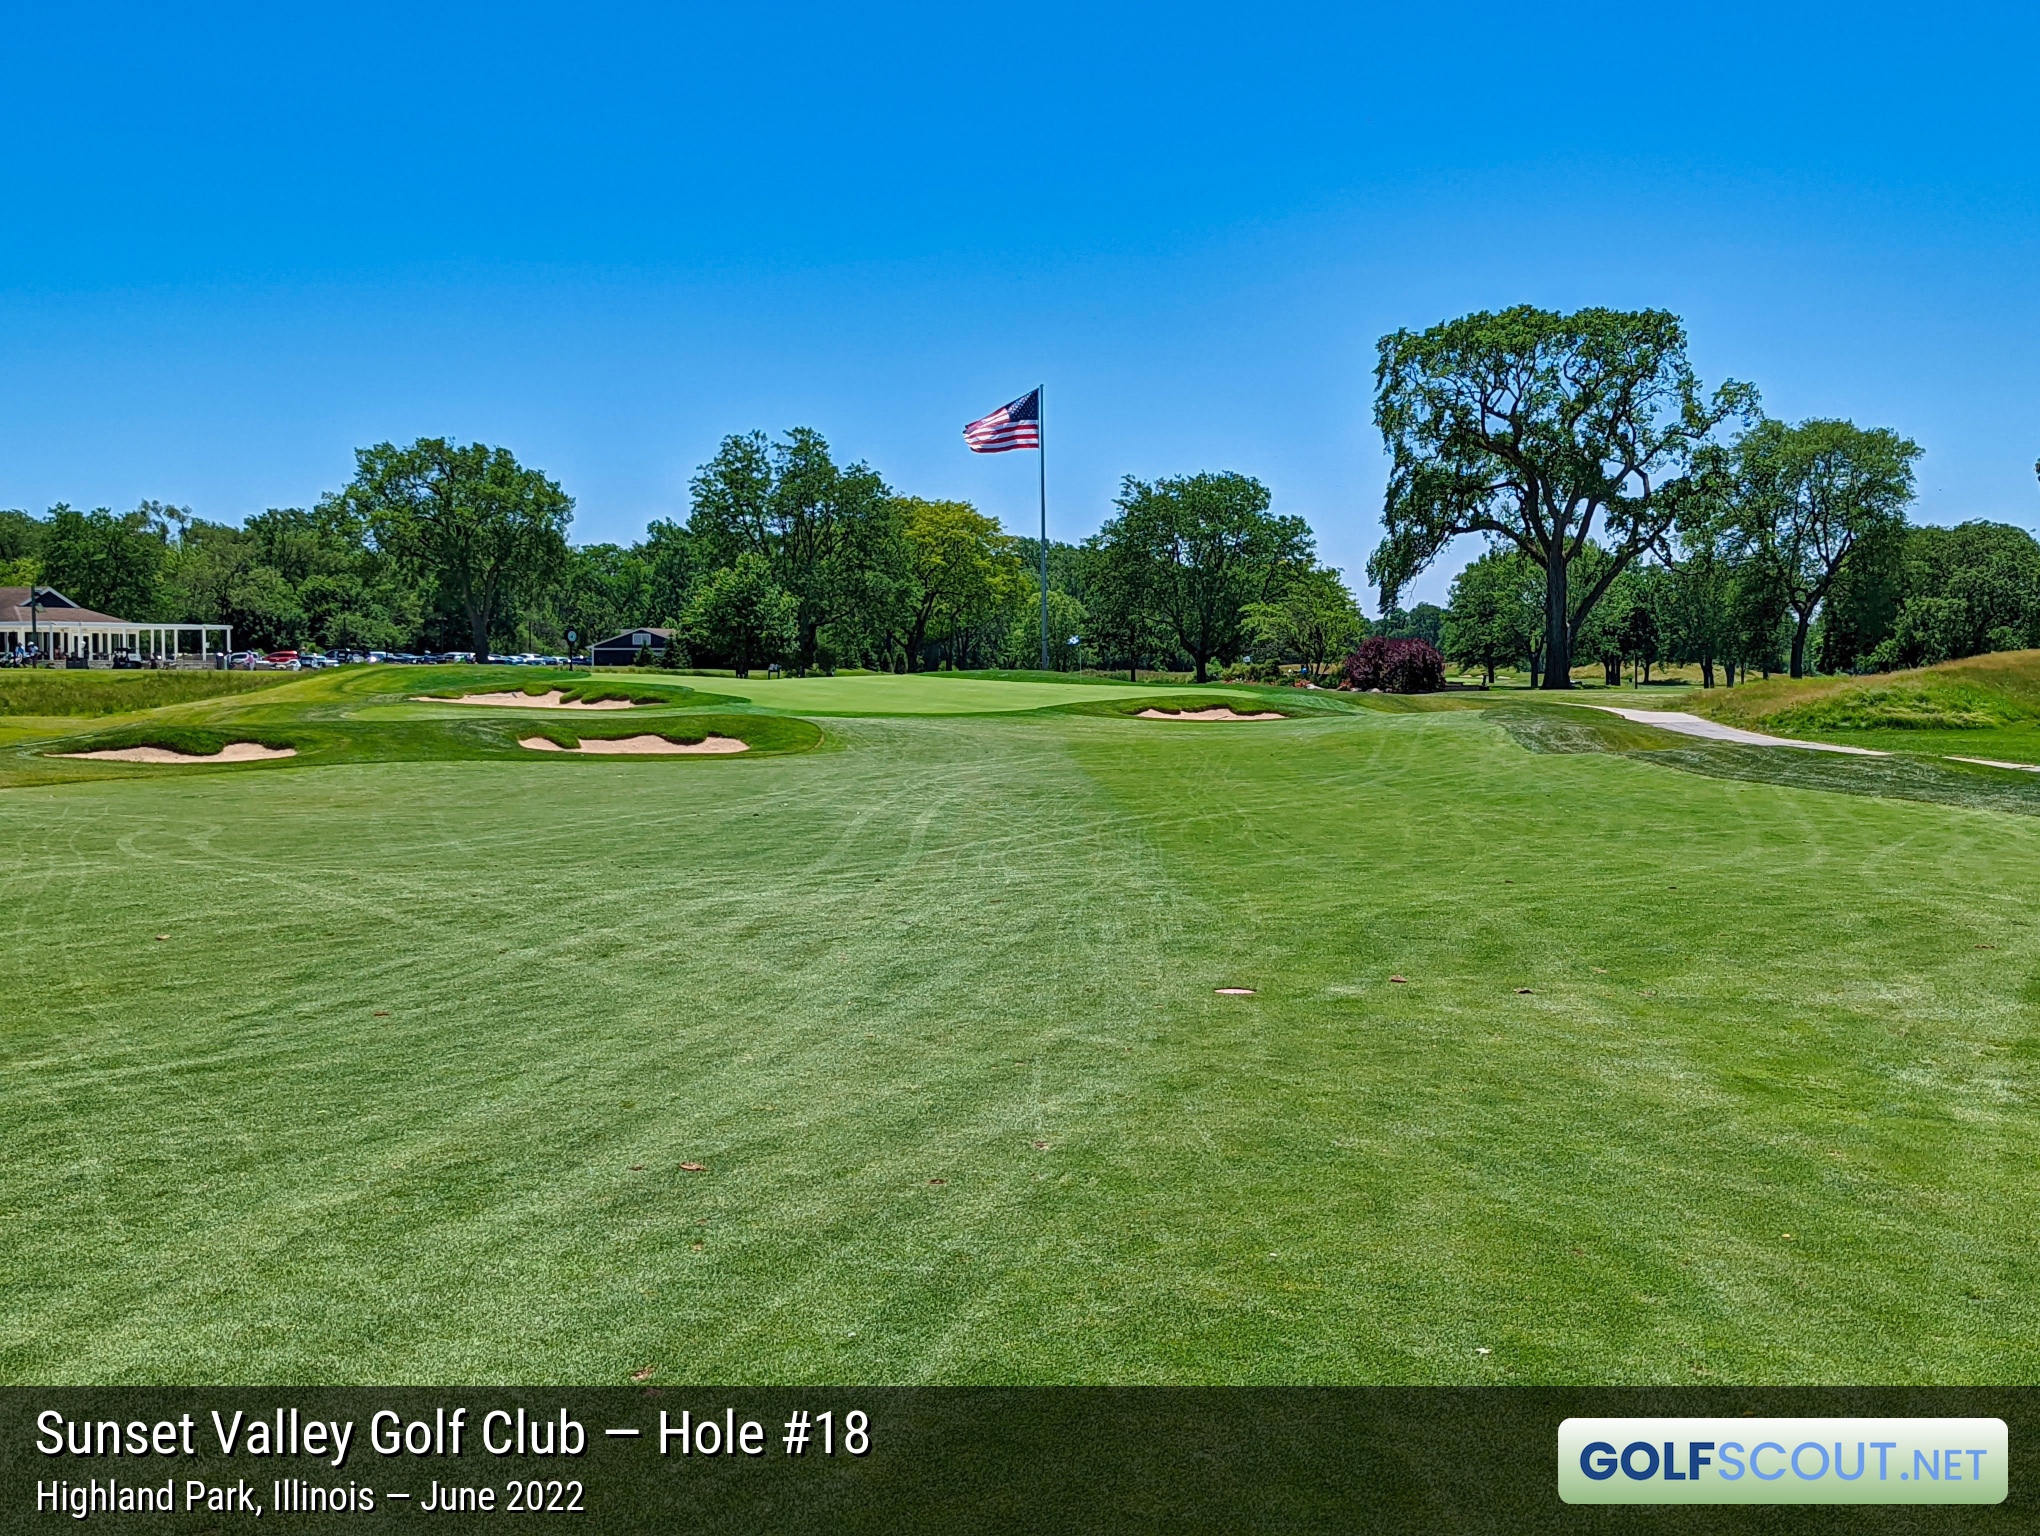 Photo of hole #18 at Sunset Valley Golf Club in Highland Park, Illinois. 